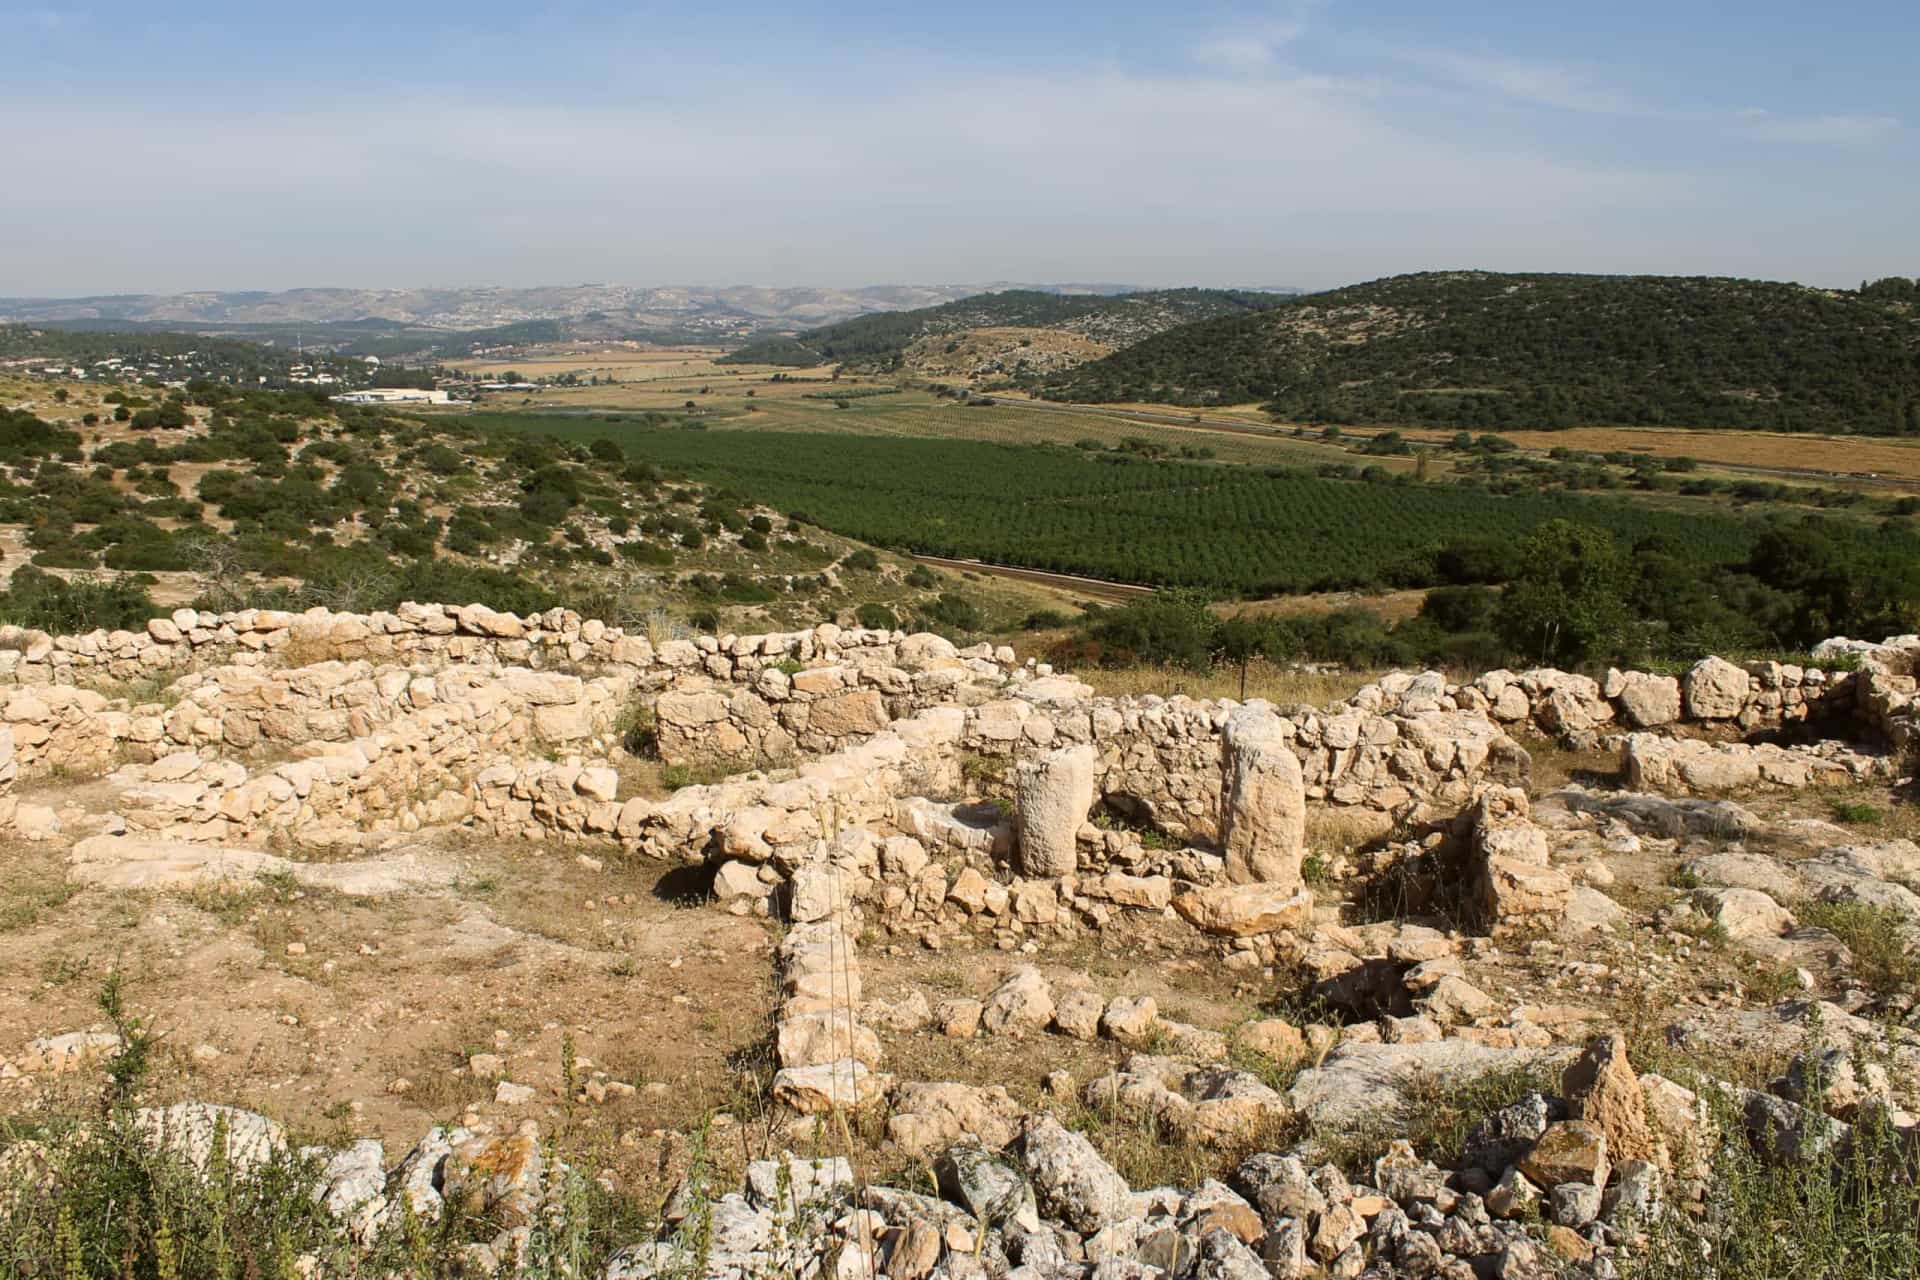 <p>Tucked under the lower hills of Judea in southern Israel is the Valley of Elah. It's here that Goliath, a colossal figure mentioned in the Book of Samuel, was slain in single combat by the diminutive David using just a slingshot.</p>